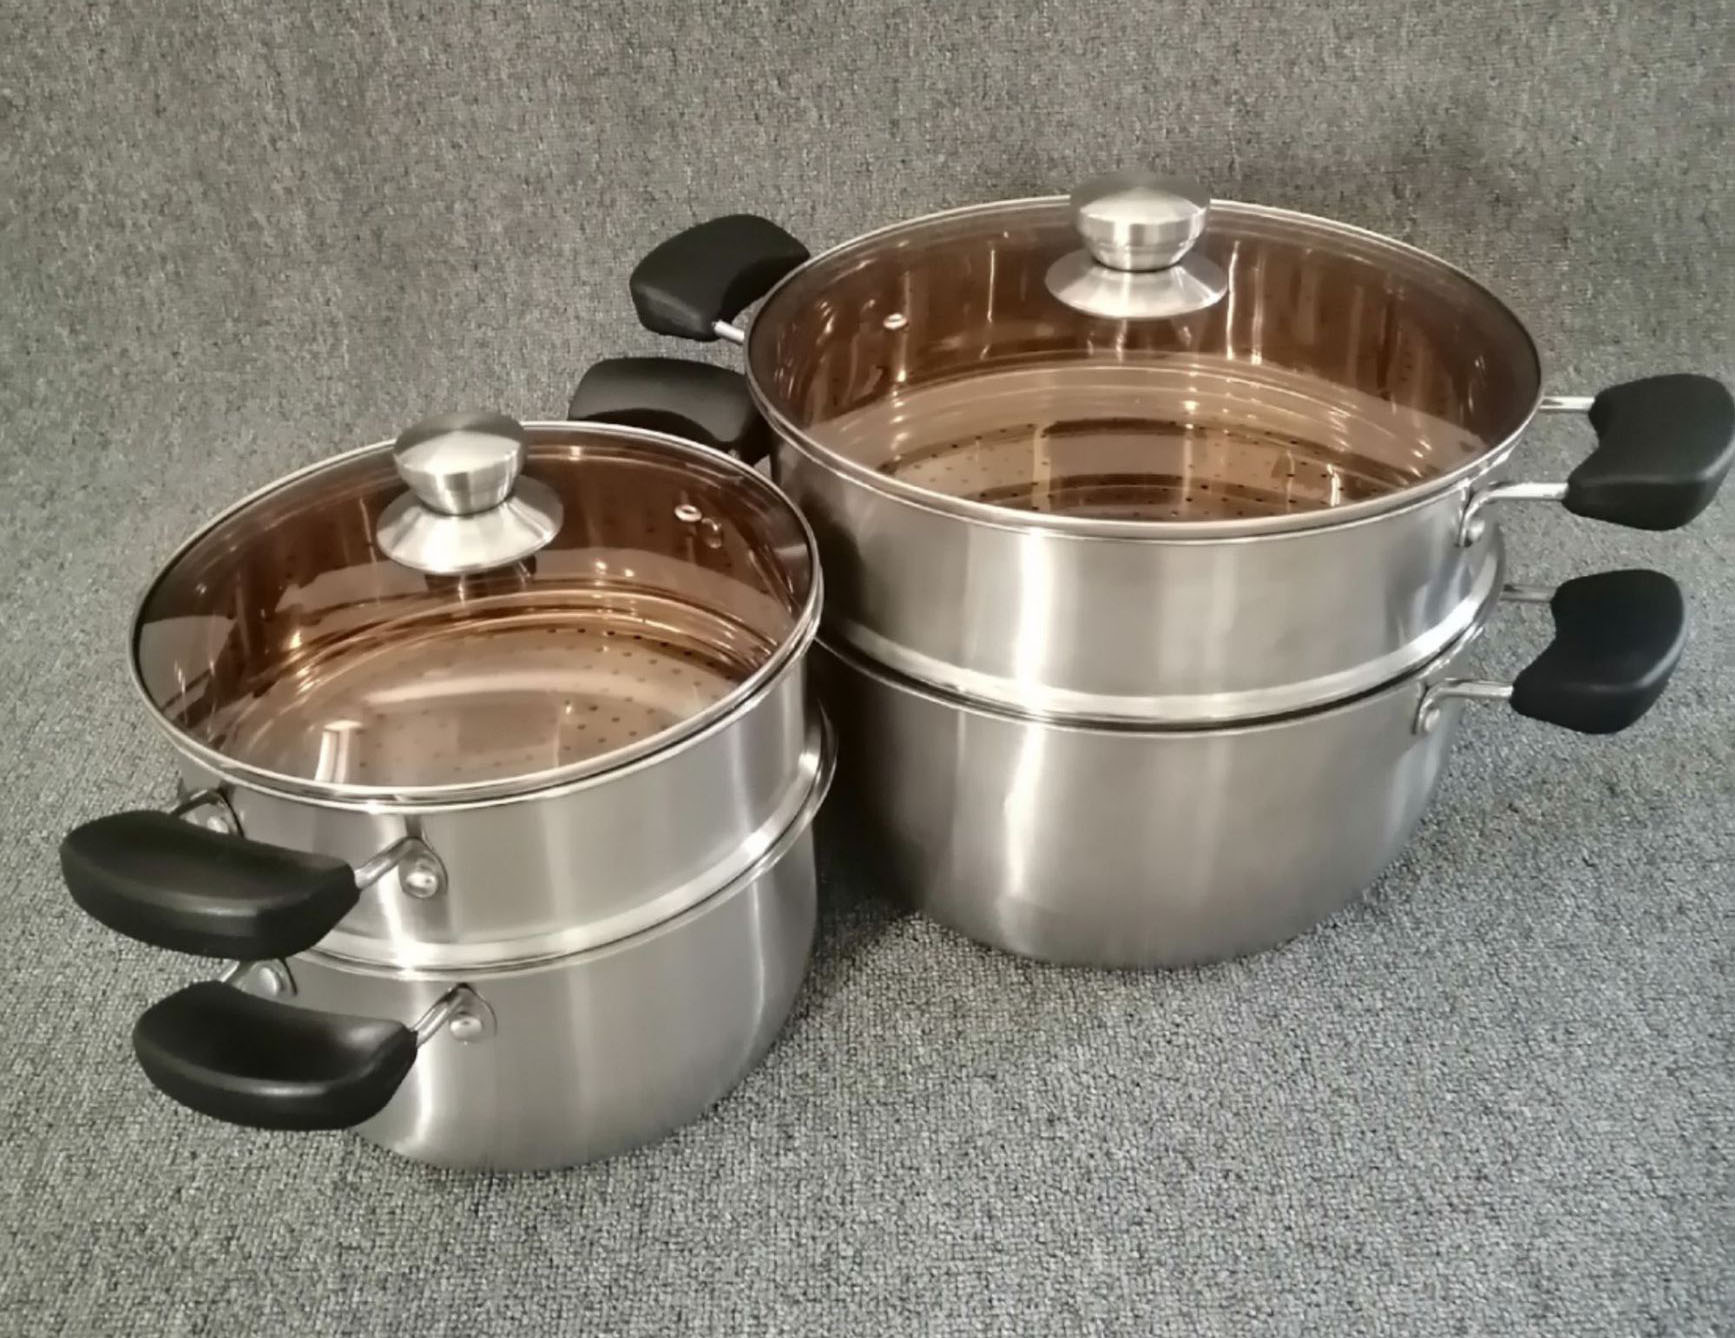 Stainless Steel Steamer set Stackable Two Tier Food Steamer